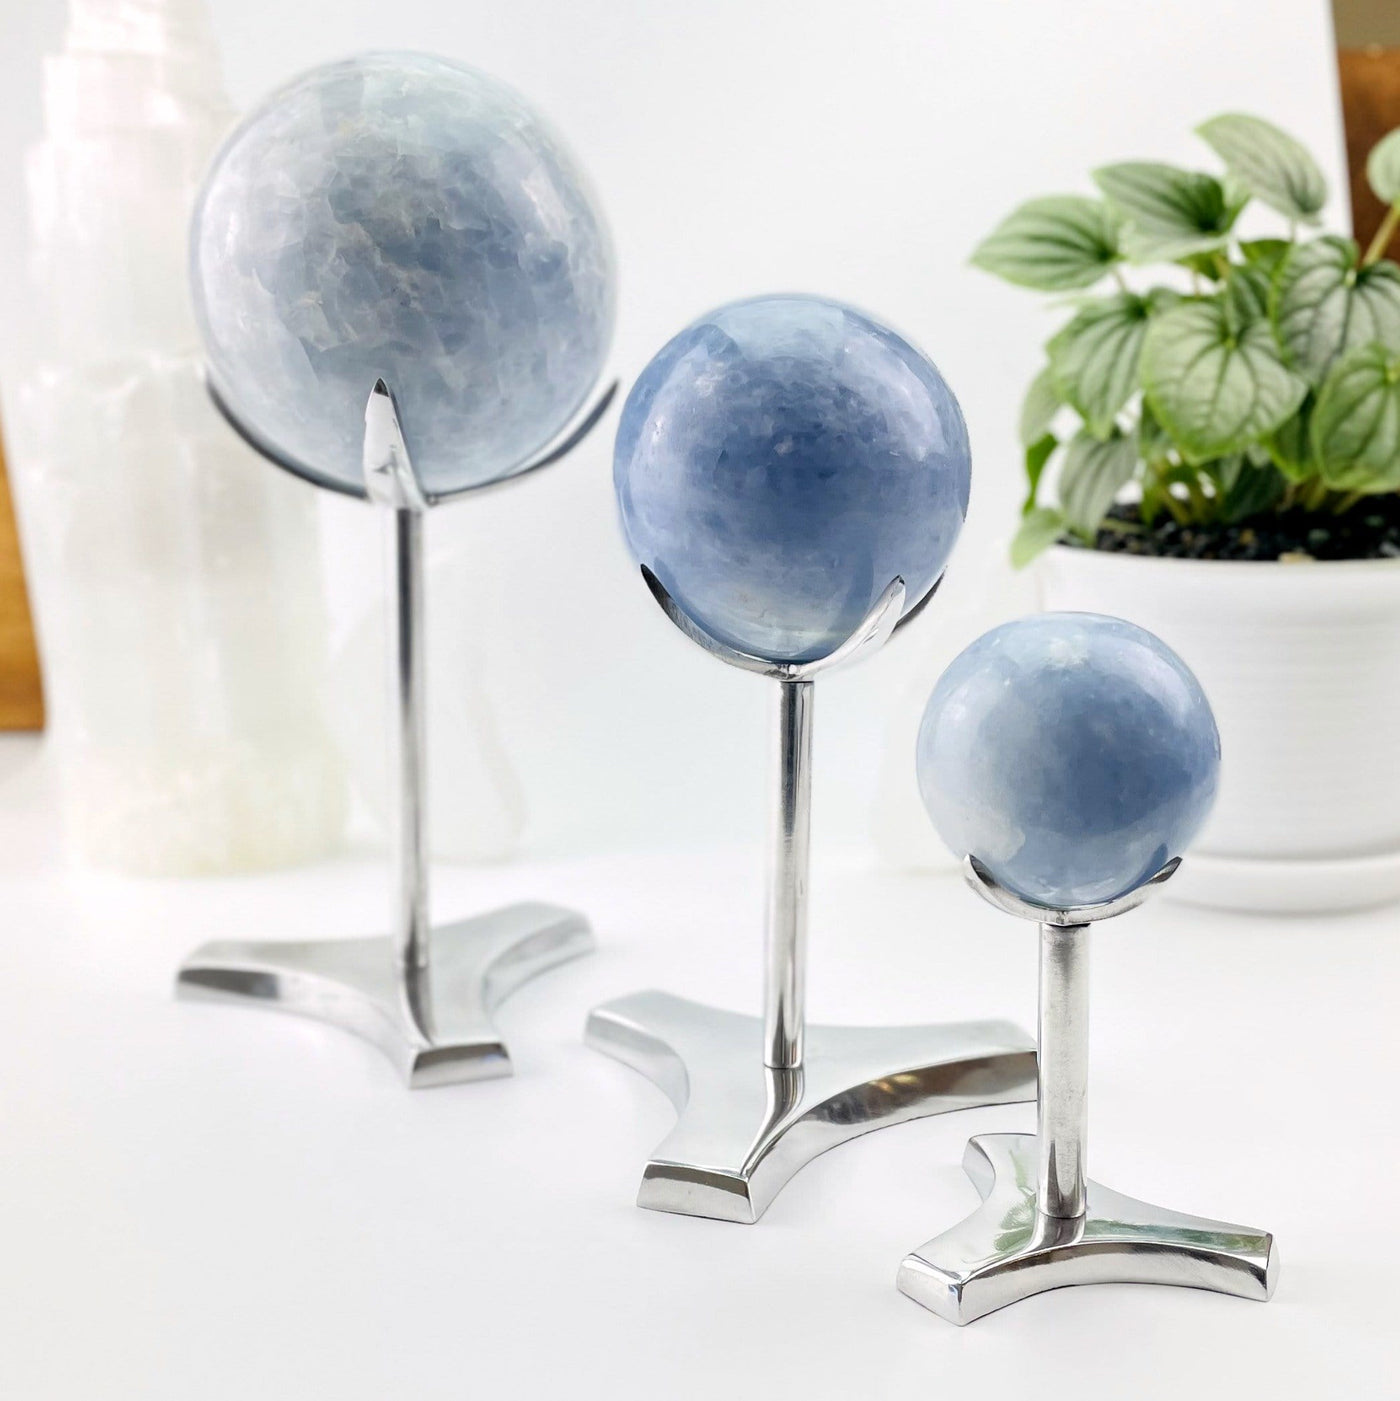 Small, medium, and large metal sphere holders with calcite spheres on them as an example of crystals they hold.